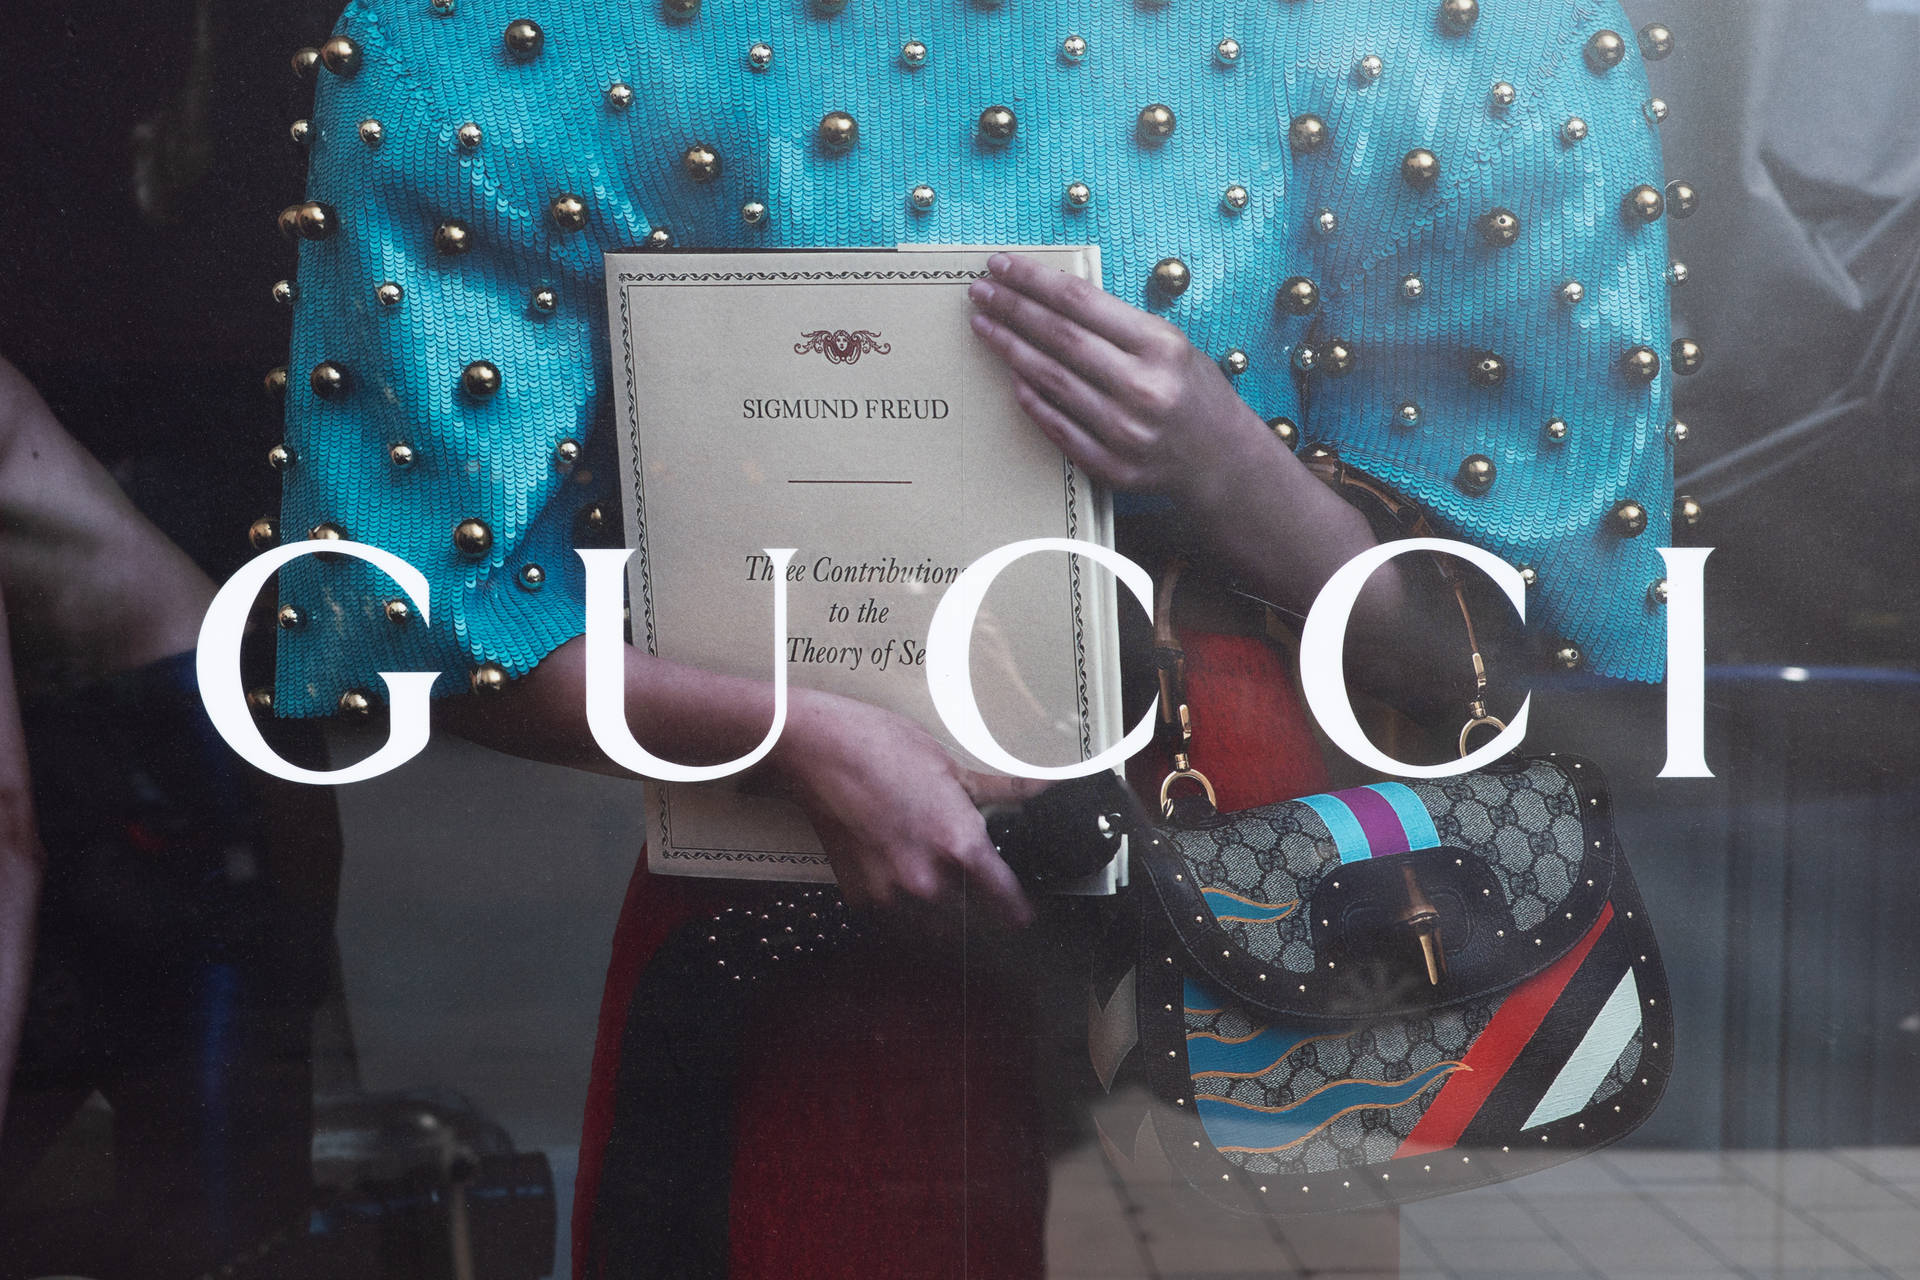 Gucci Wallpapers